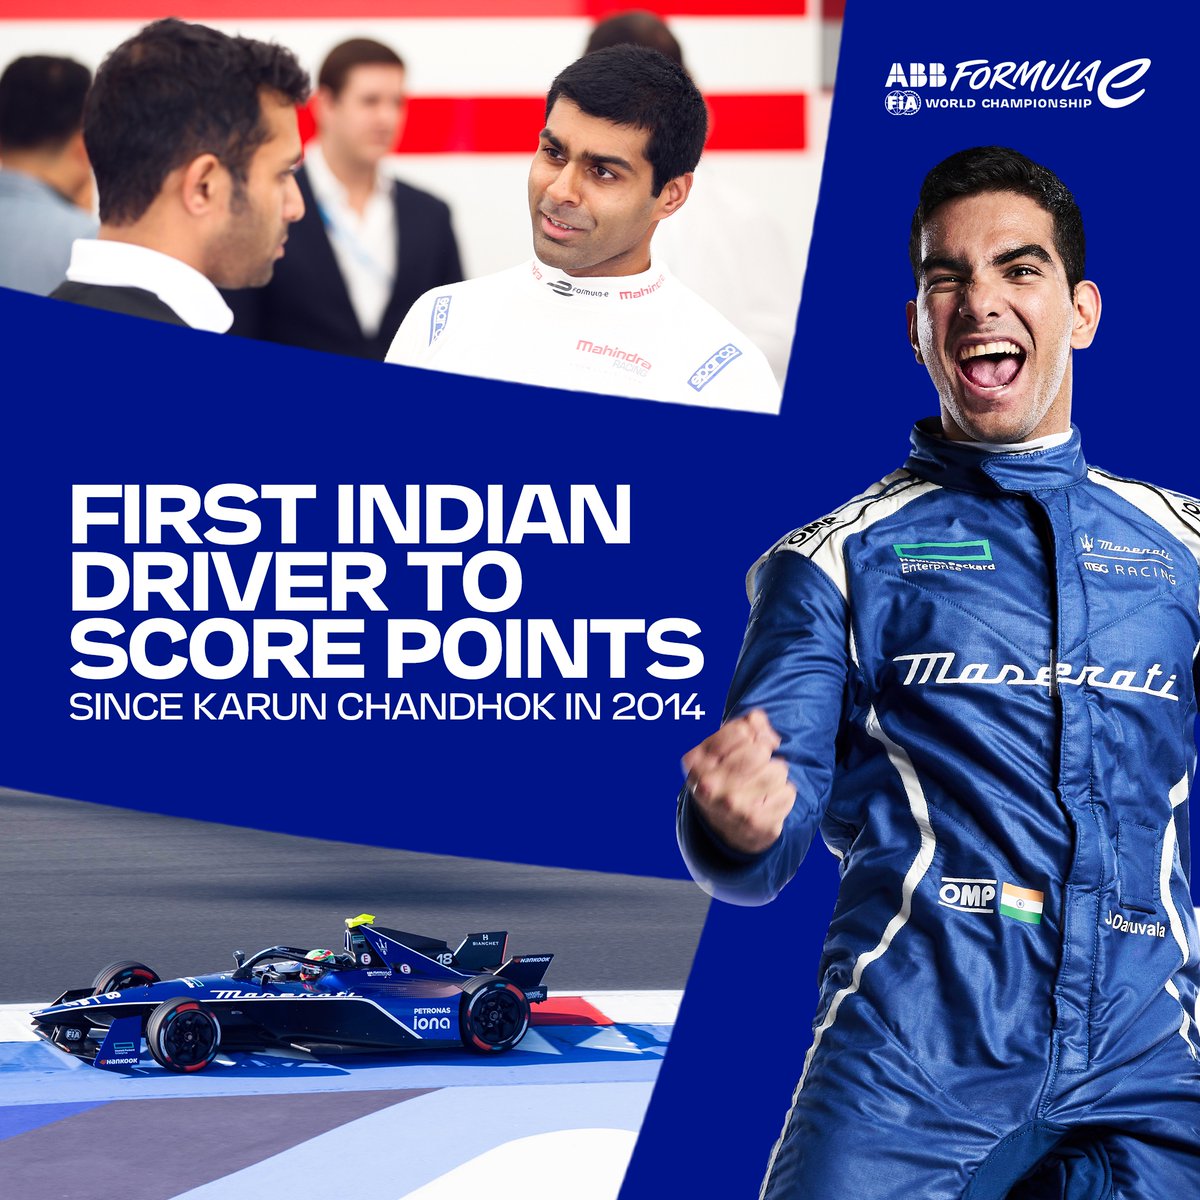 Let’s go, @DaruvalaJehan!! ⚡️ The @maseratimsg man is the first Indian driver to score points in Formula E since @karunchandhok, having recorded a P9 finish in the #MisanoEPrix Round 7!